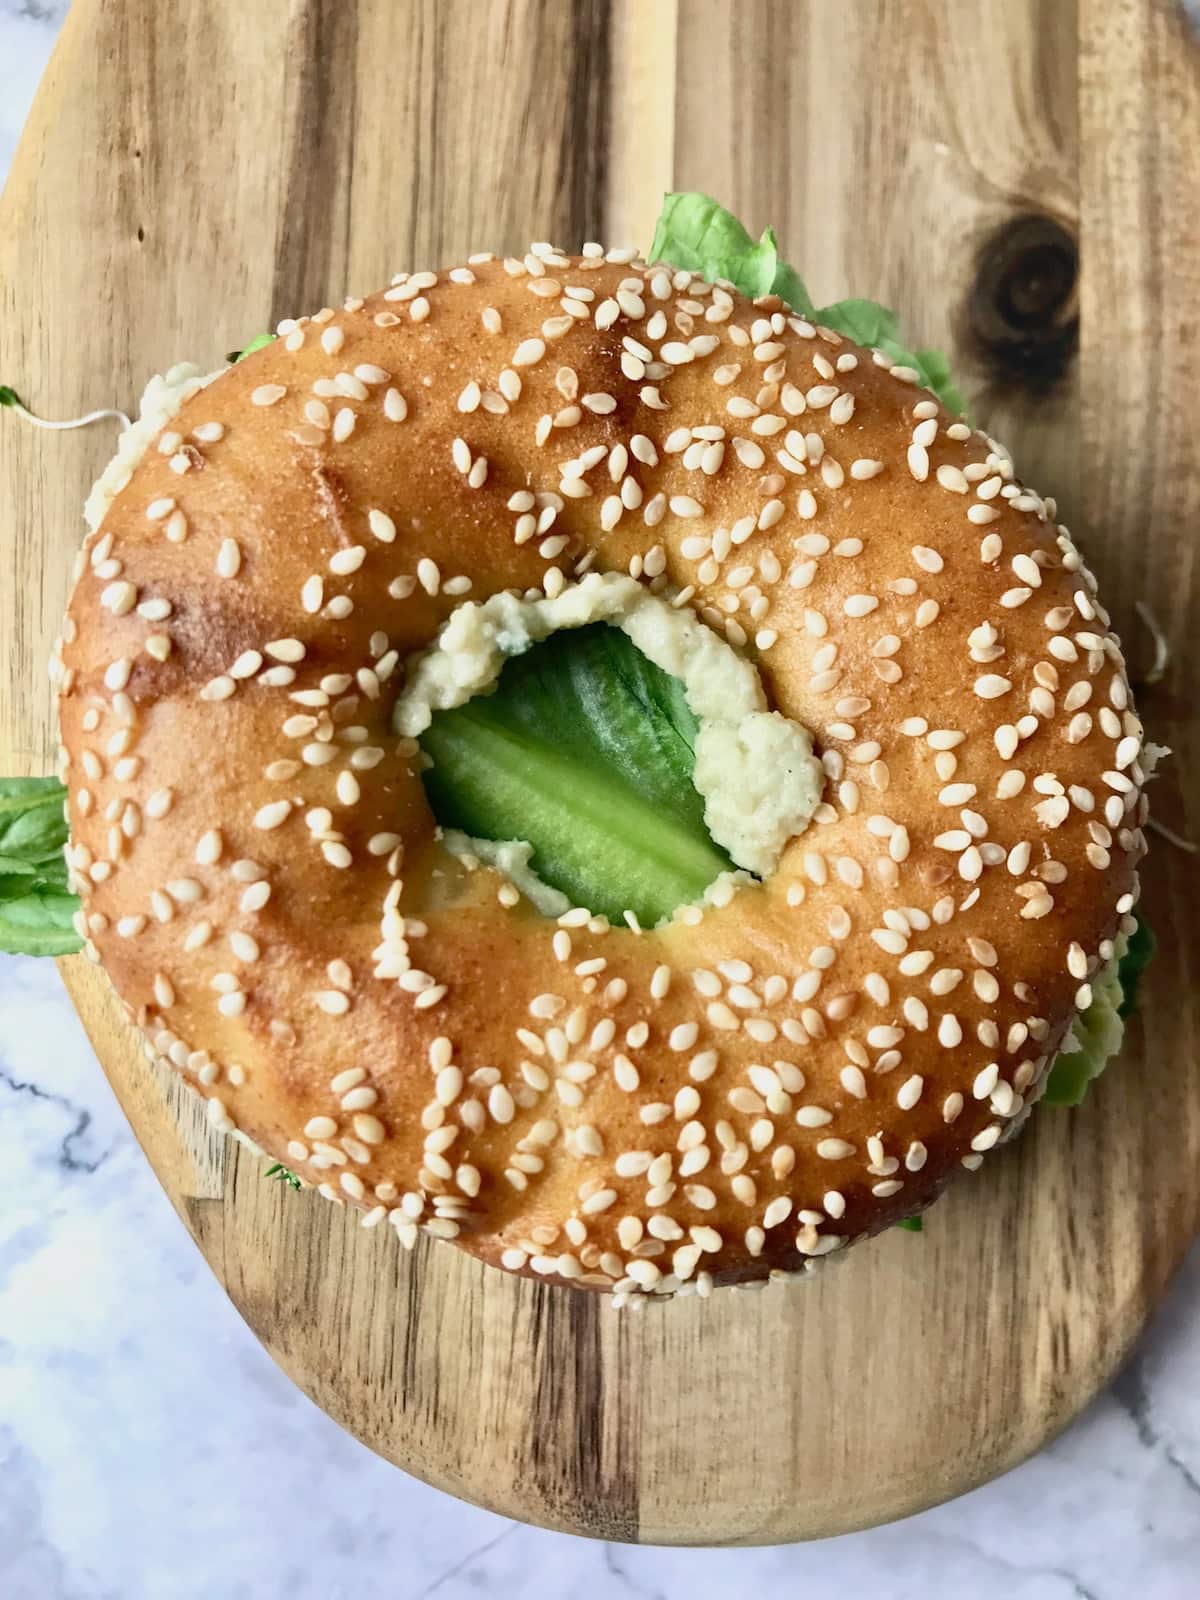 Overhead view of a bagel filled with veggies and vegan cream cheese.